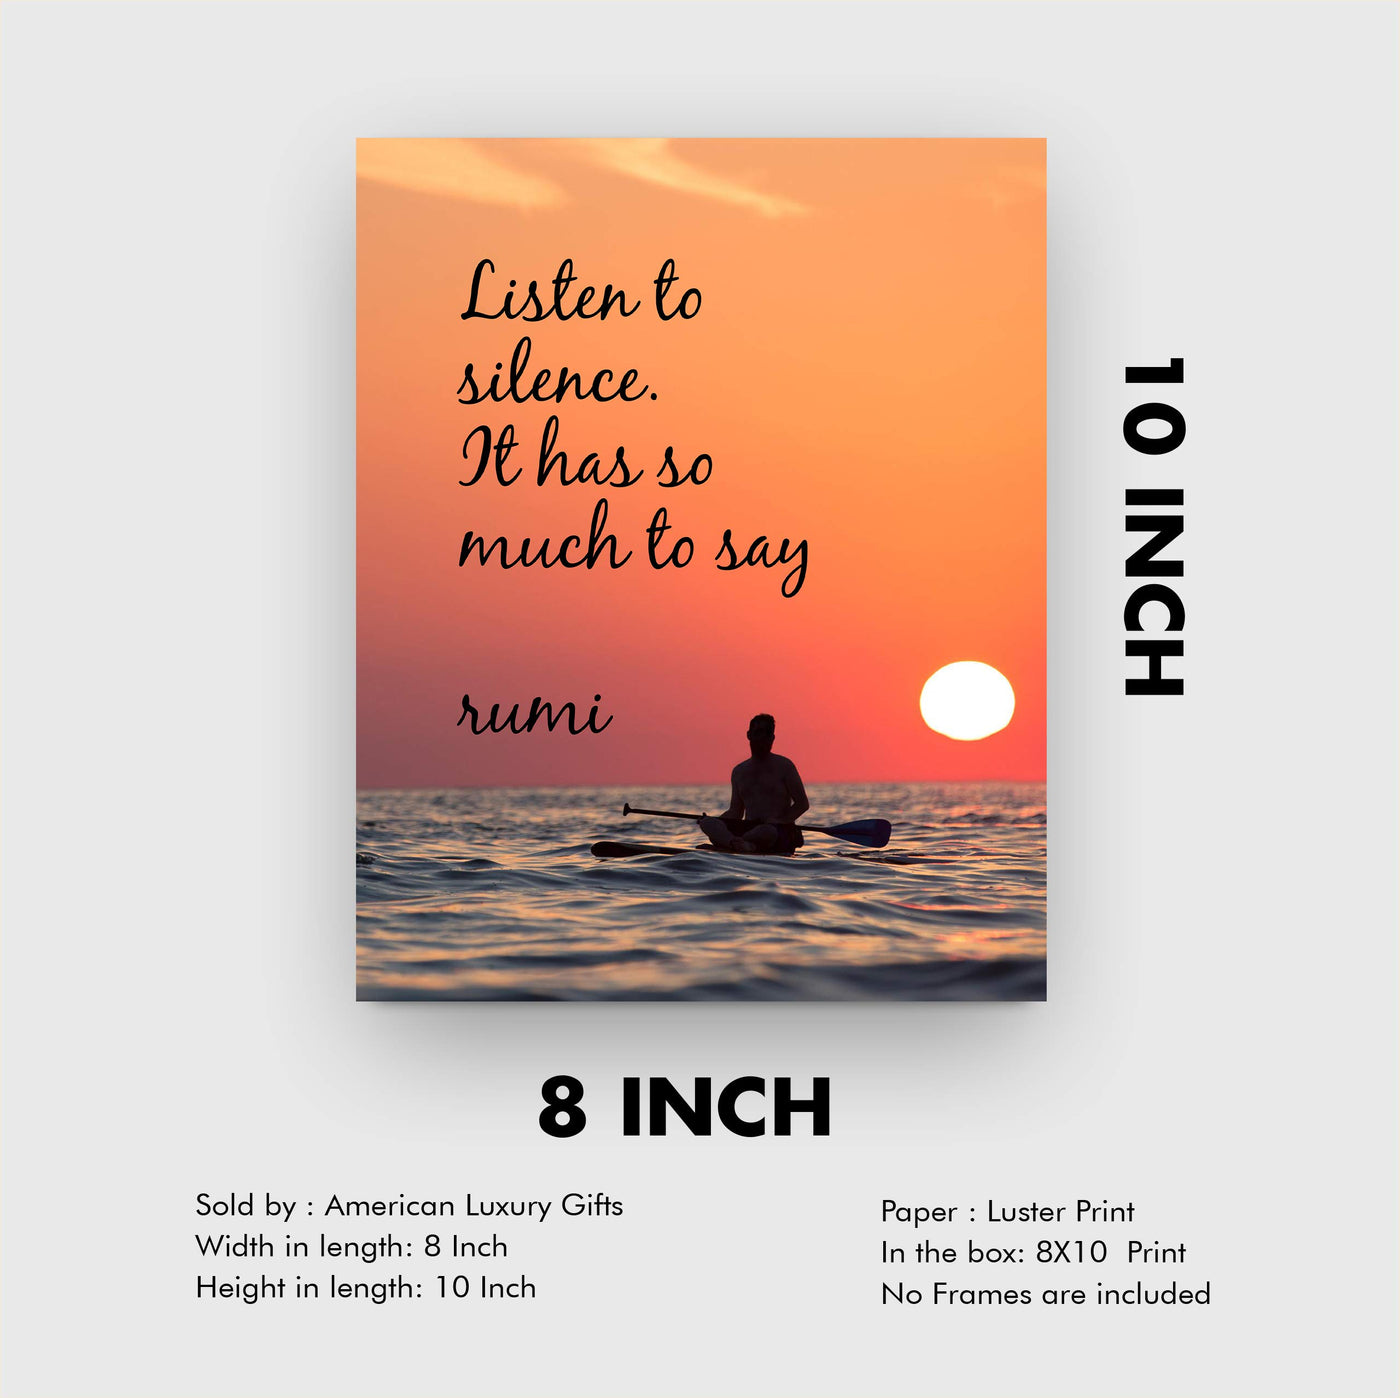 Listen to Silence-It Has Much to Say-Rumi Inspirational Quotes Wall Sign-8 x 10" Ocean Sunset Print-Ready to Frame. Modern Typographic Design. Home-Office-Dorm-Beach Decor. Great for Inspiration!